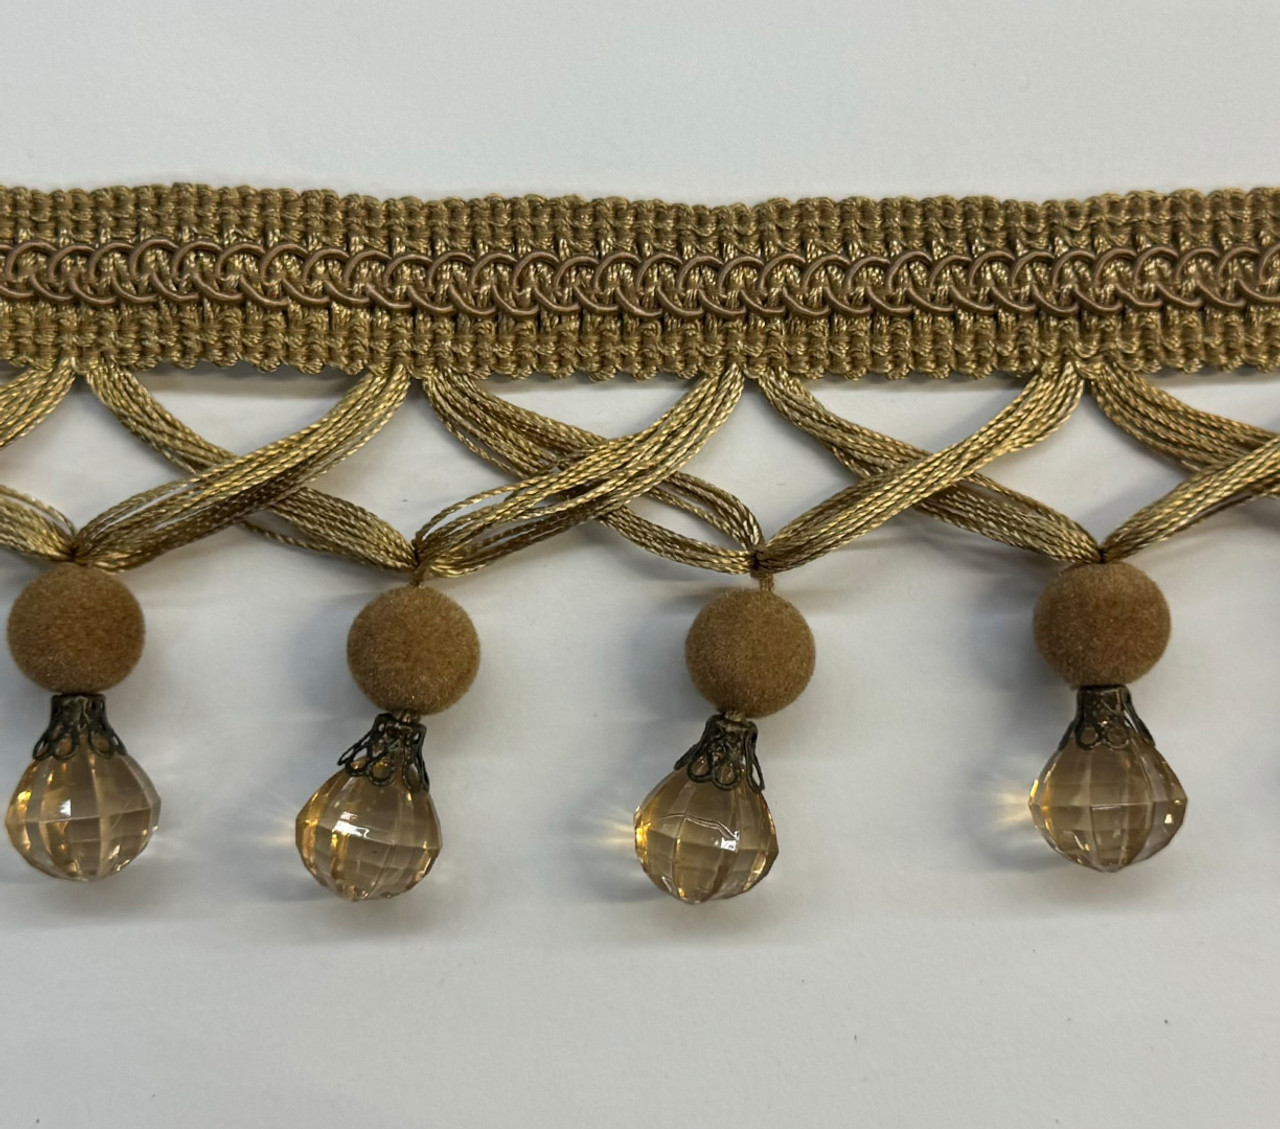 Beaded Fringe Light Brown Trim ,2 1/2 inches, Perfect for drapery , upholstery , & bedding.